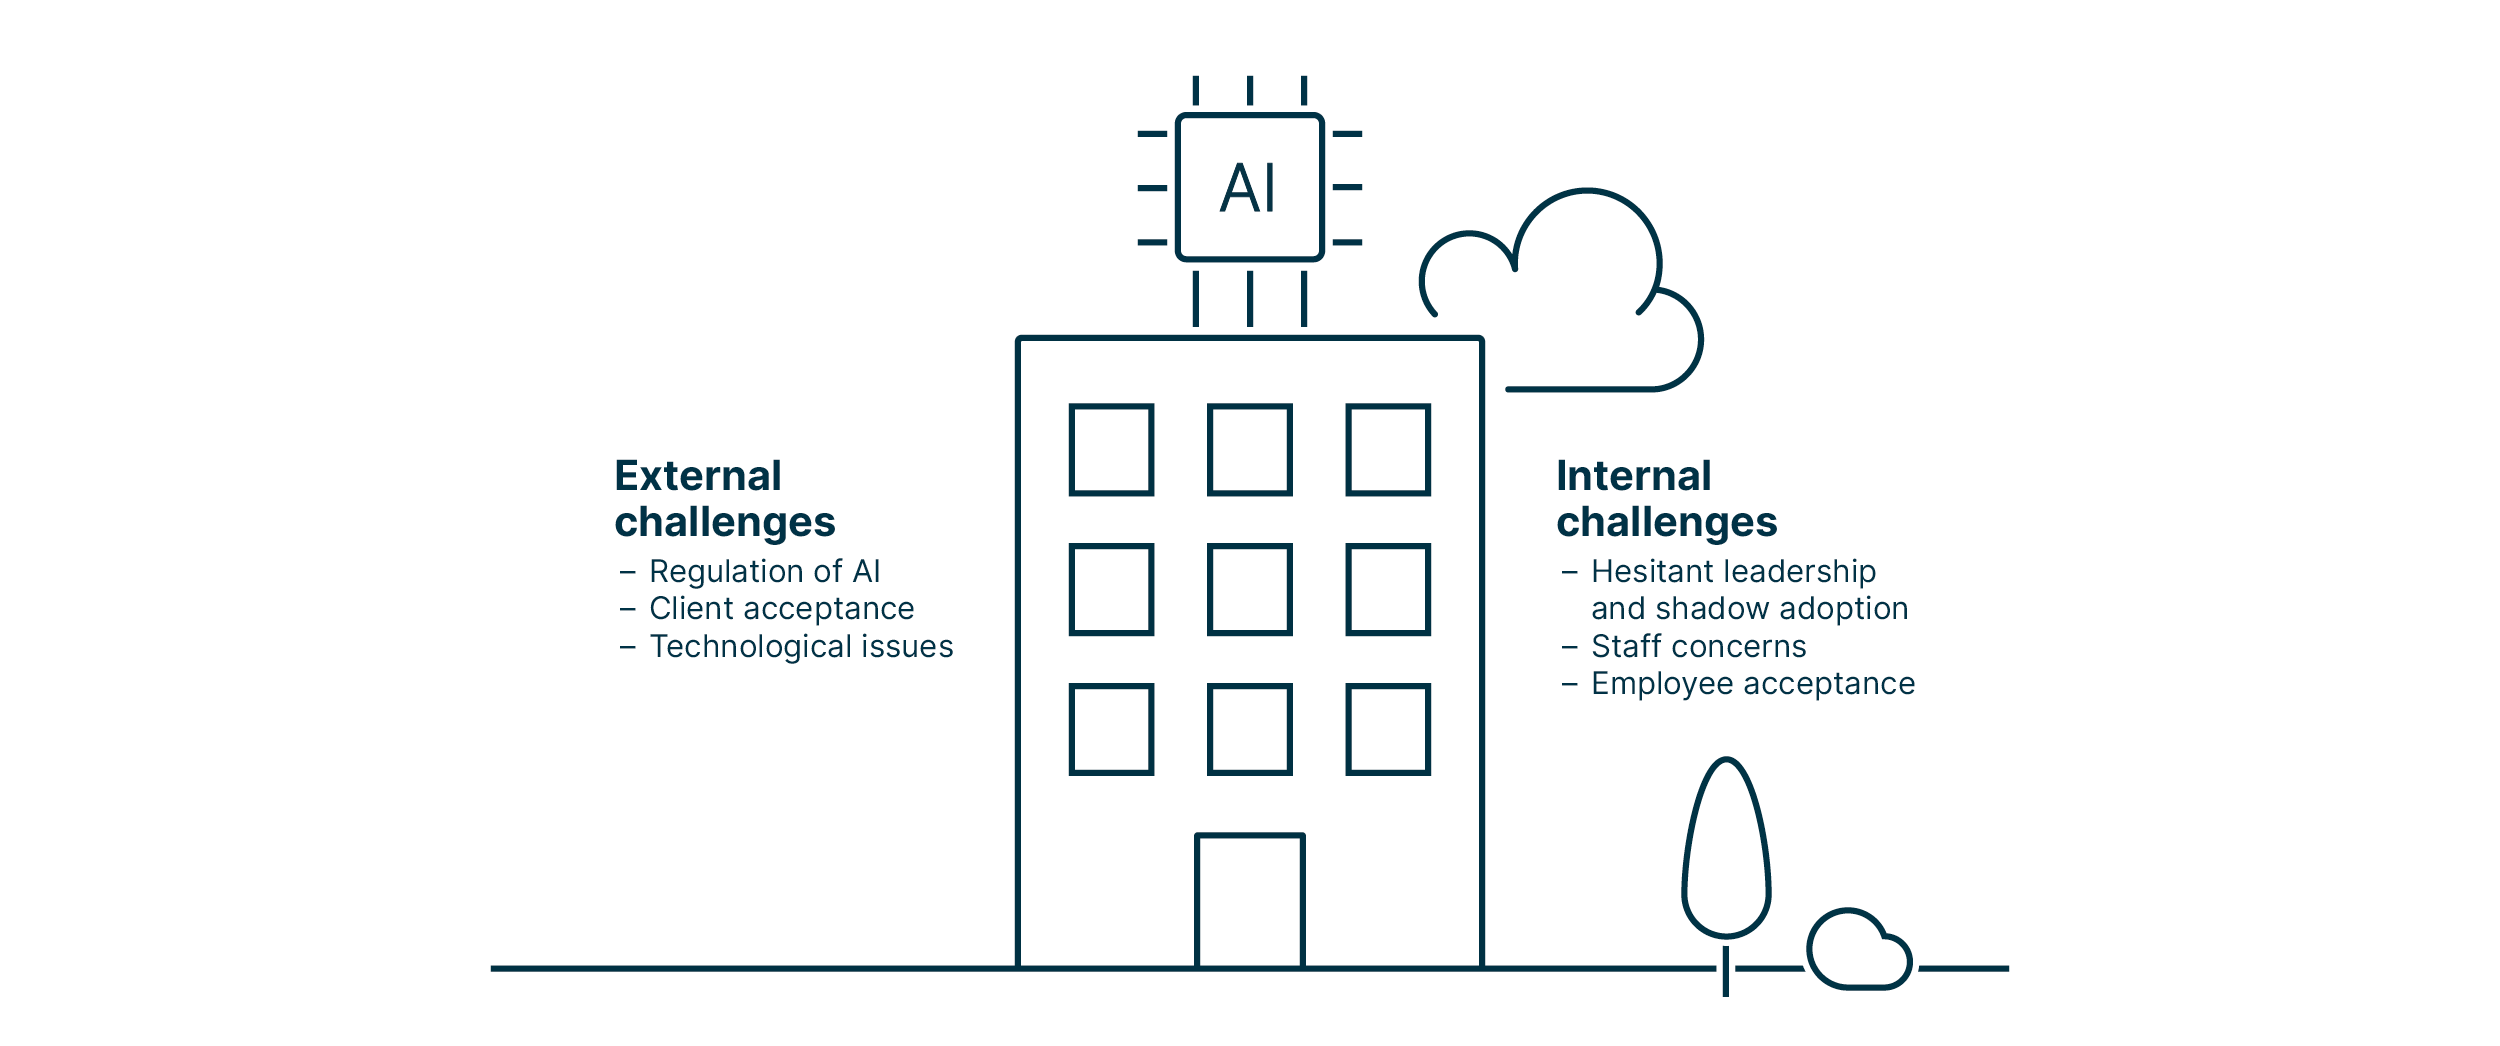 A visual summary of the external and internal challenges of introducing AI